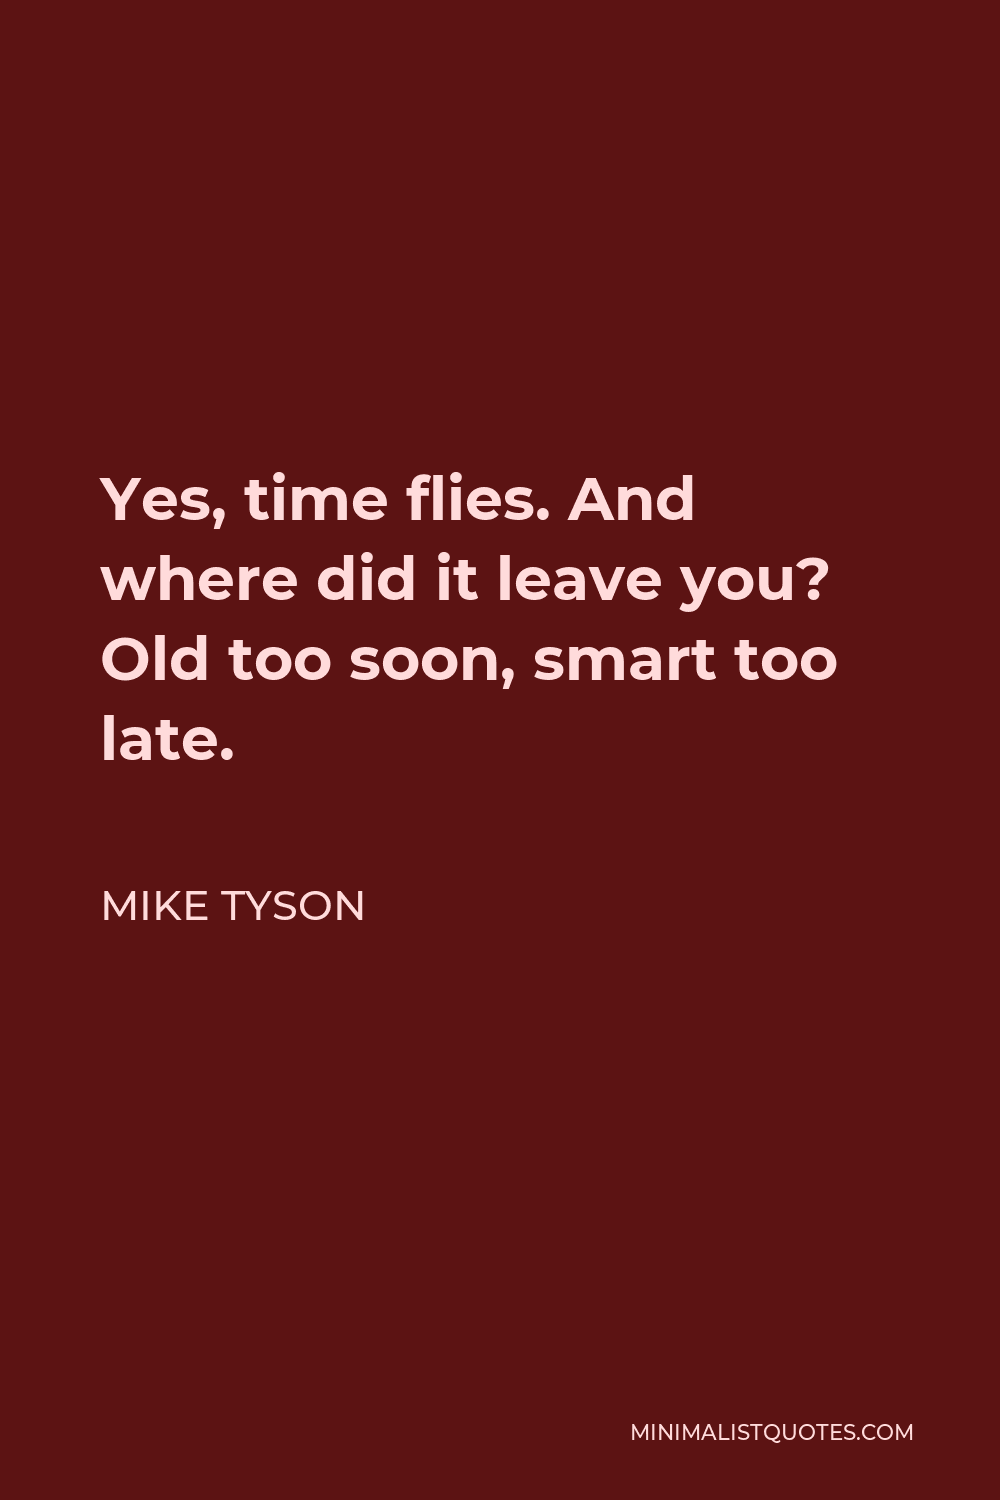 Mike Tyson Quote - Yes, time flies. And where did it leave you? Old too soon, smart too late.